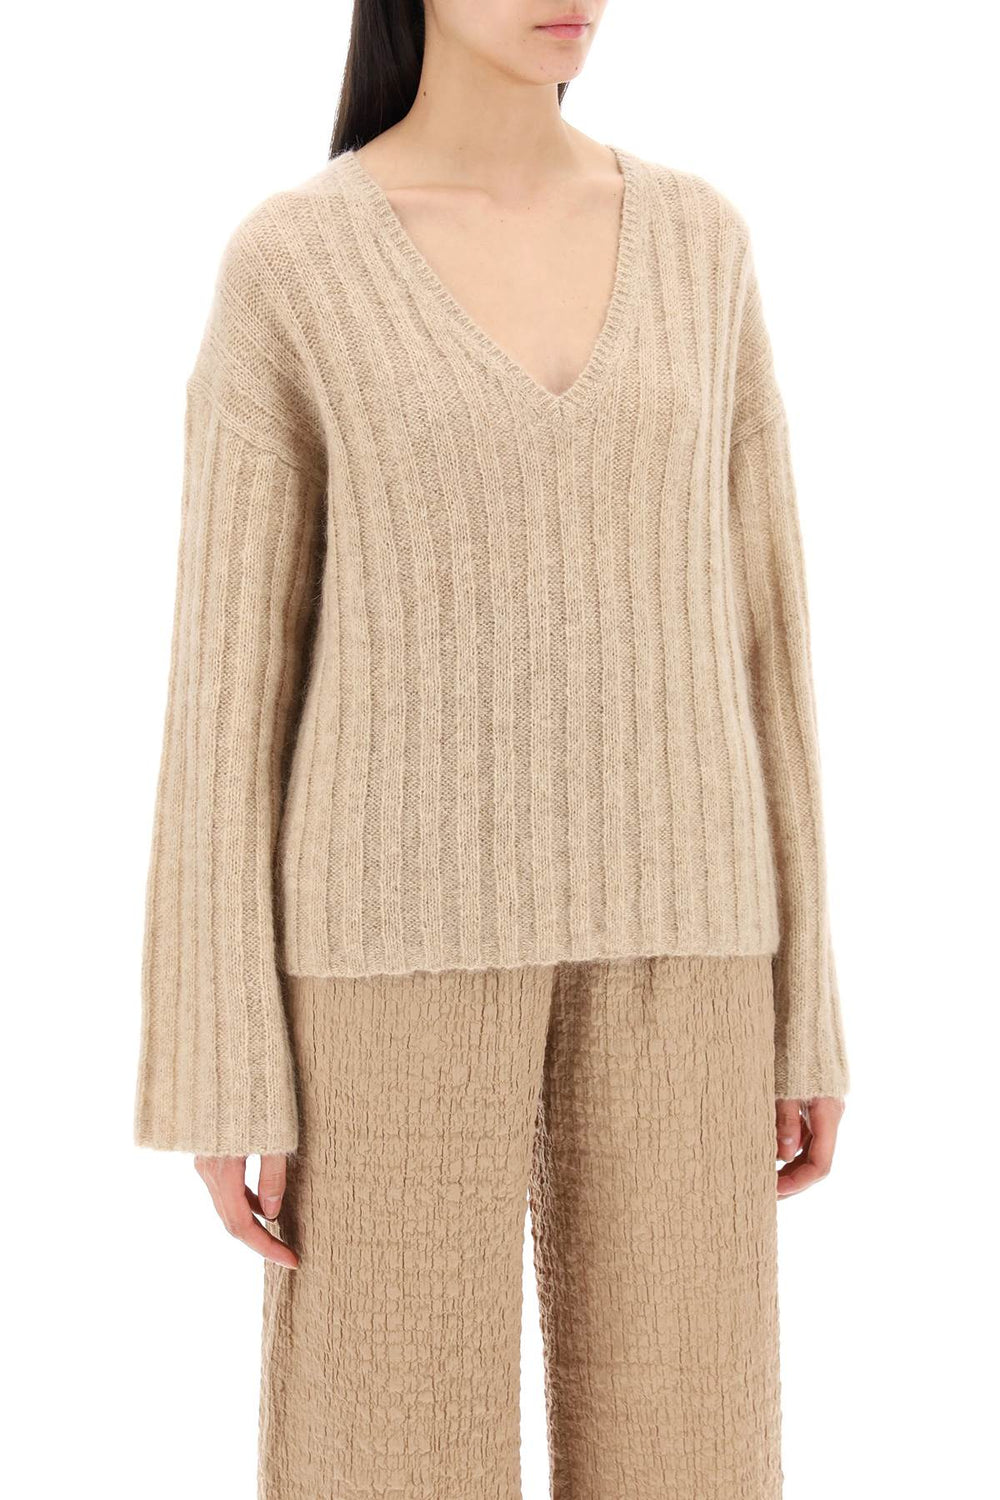 cimone sweater in flat-ribbed knit-1